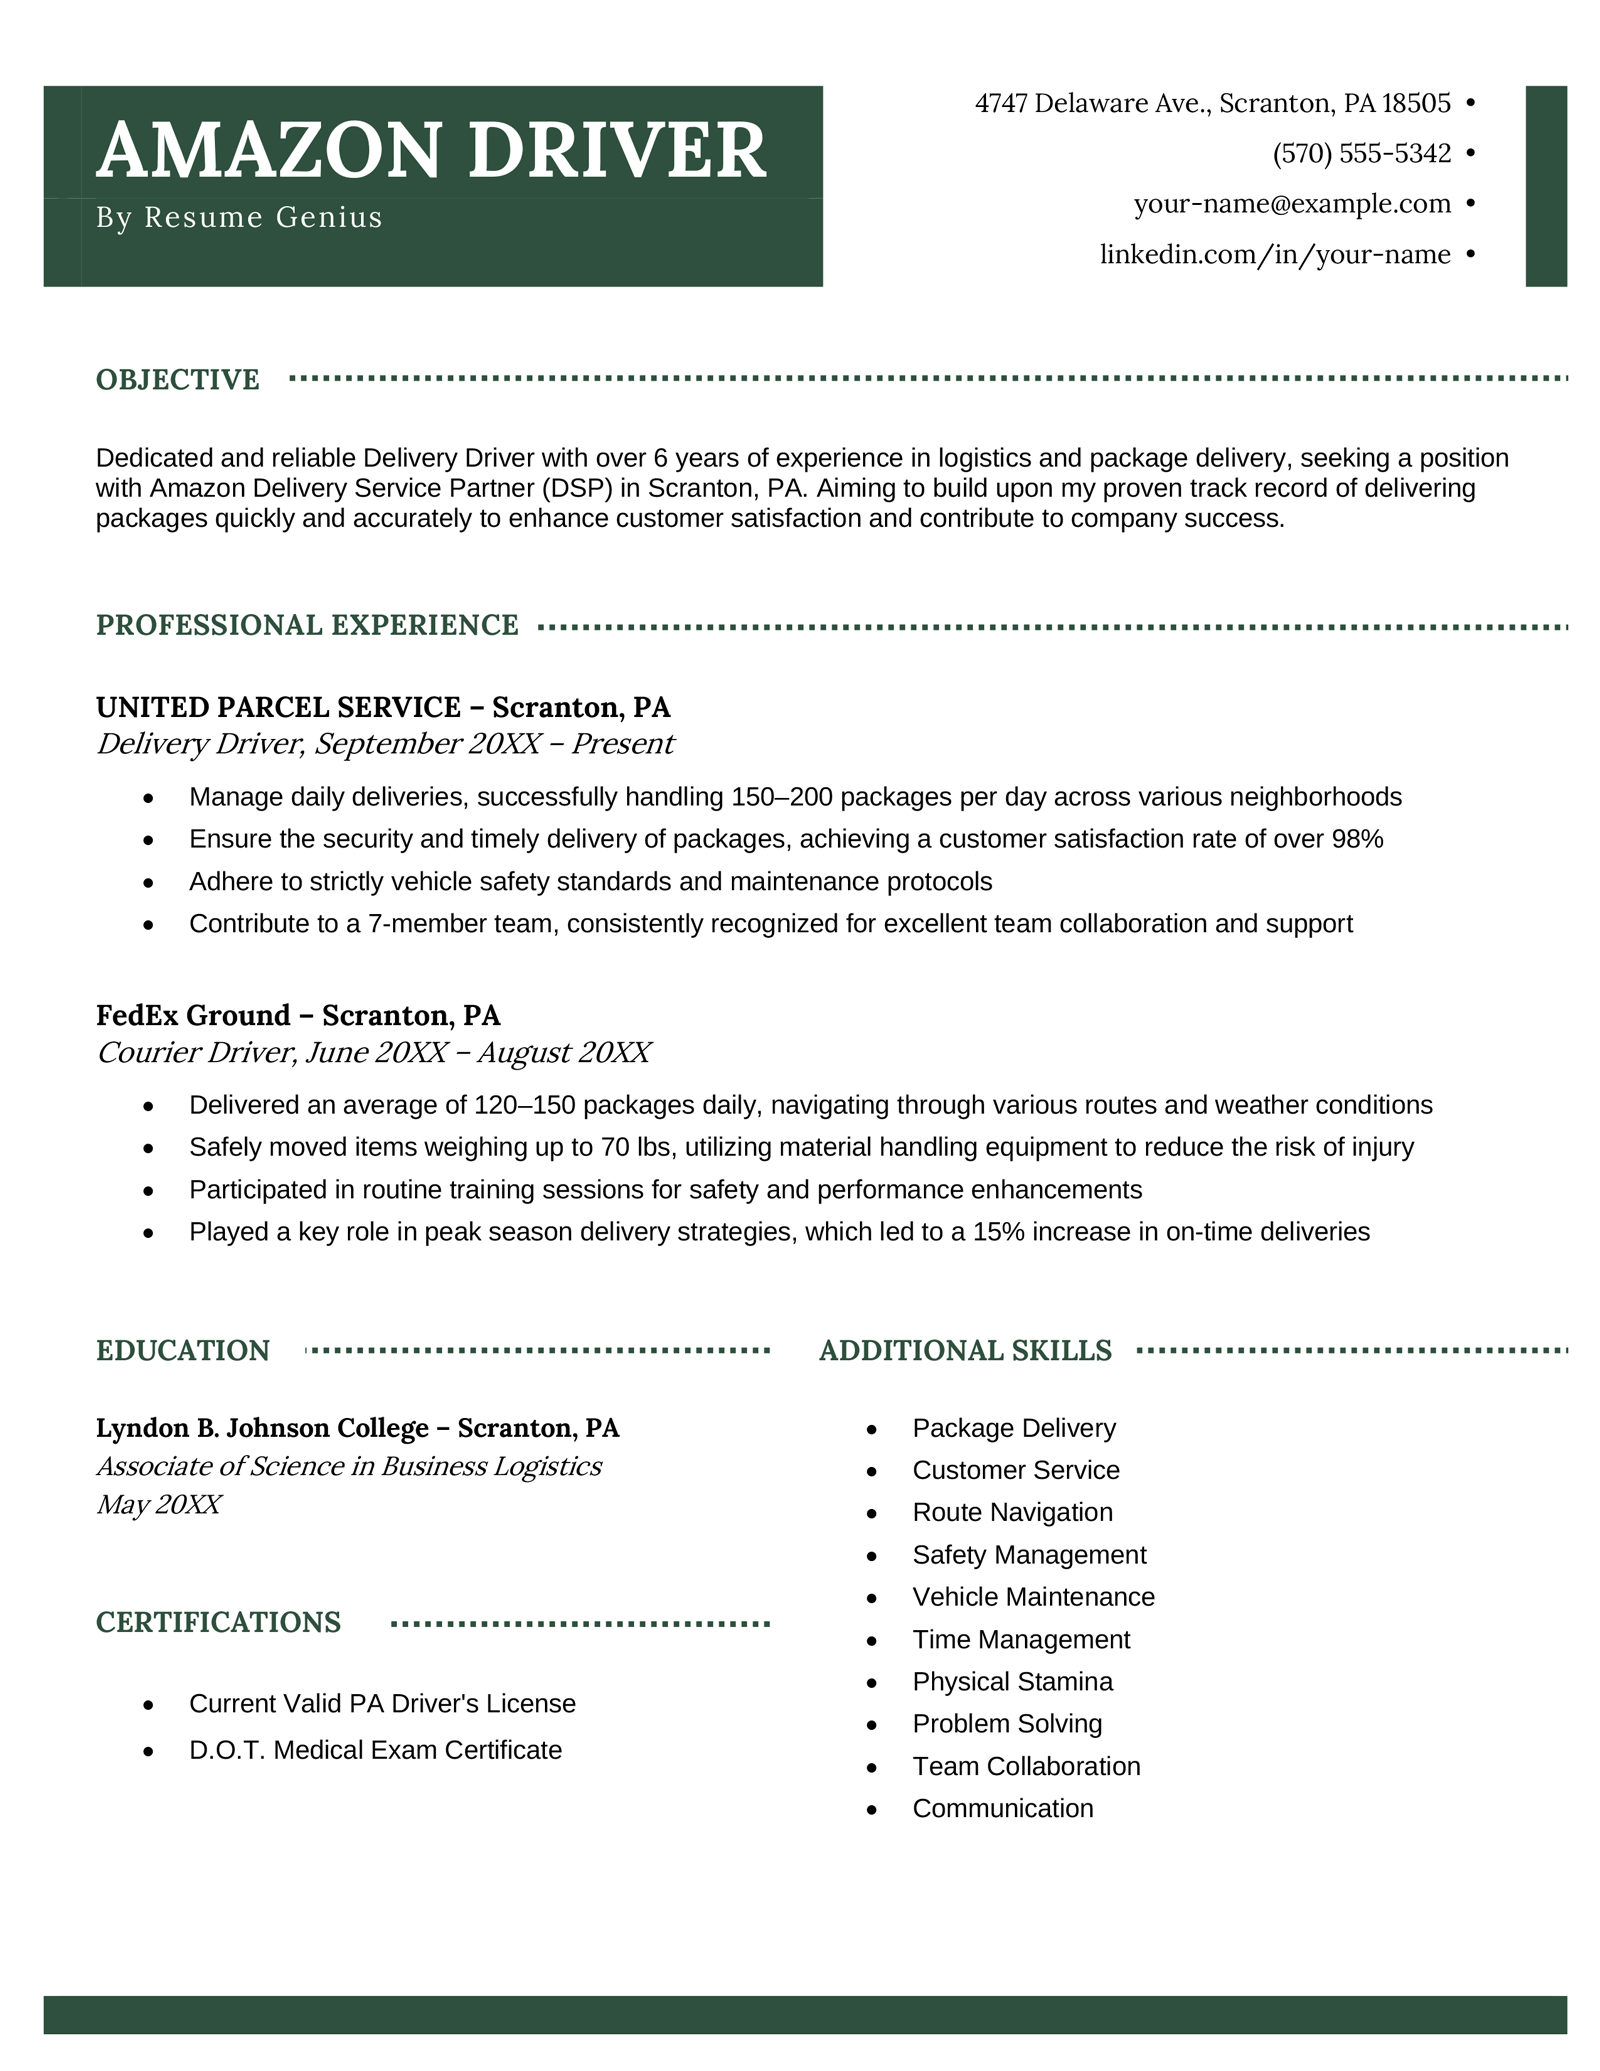 An Amazon driver resume example in green.